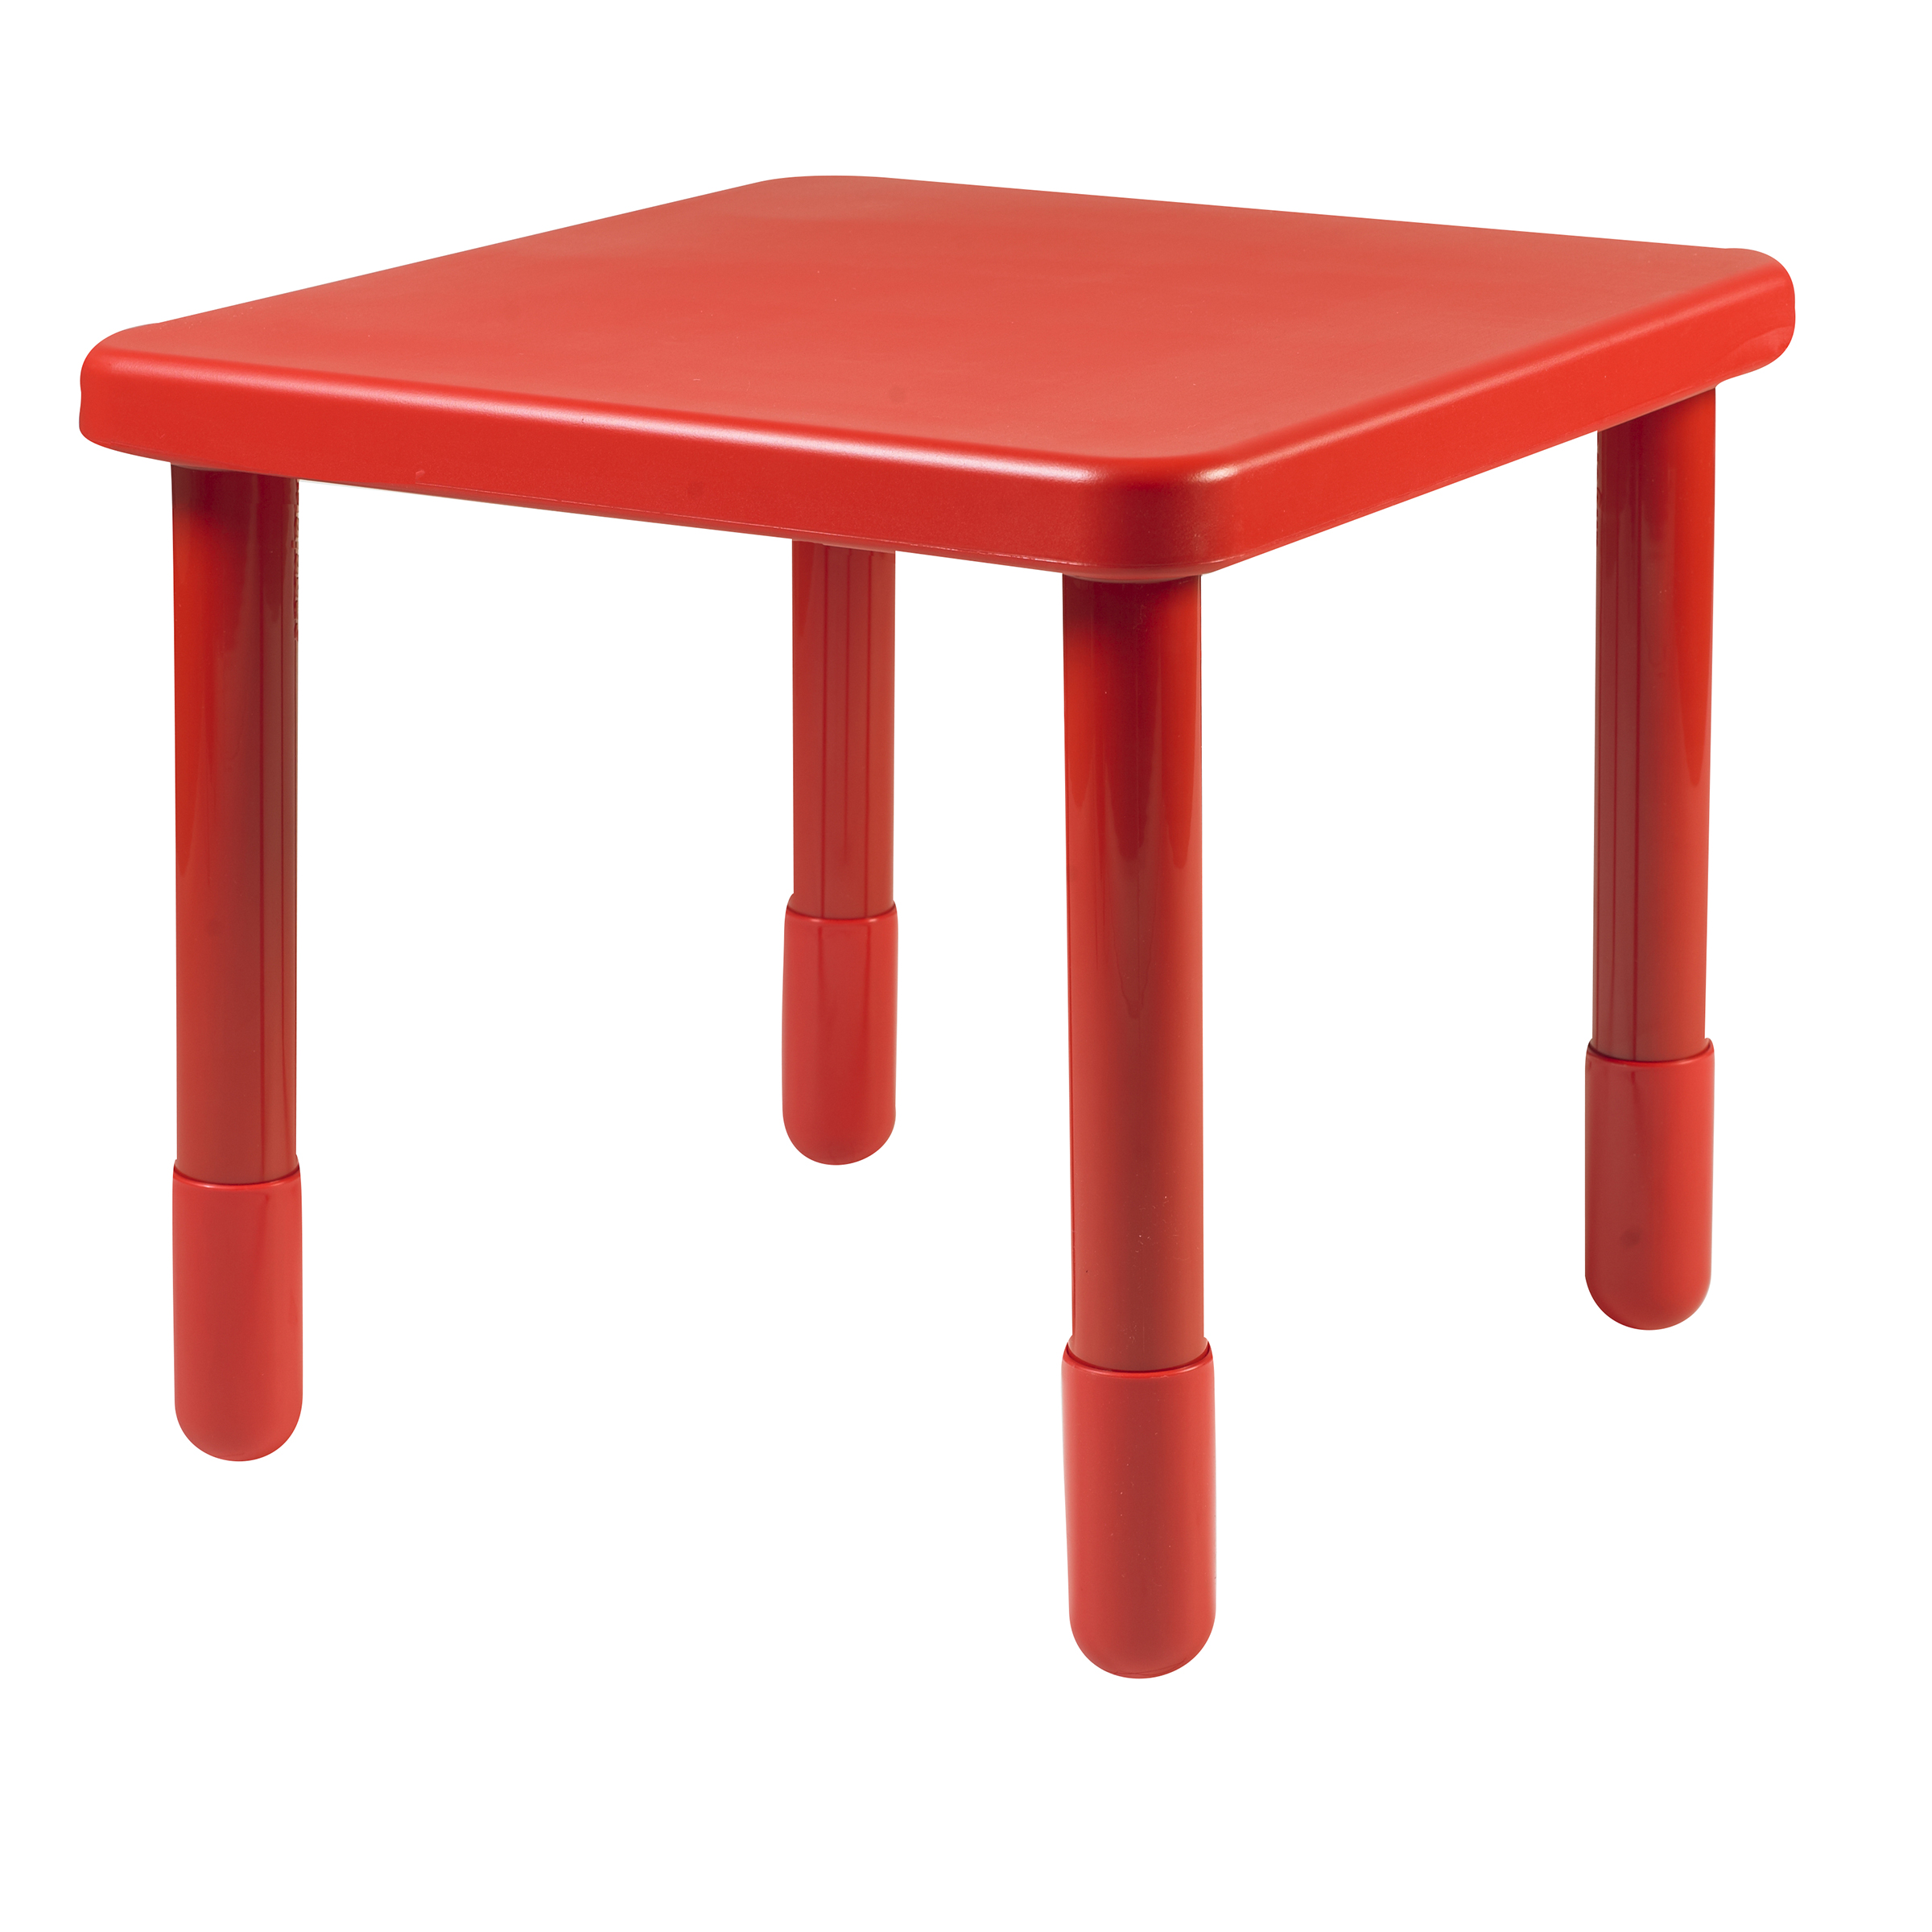 Value 61 cm  Square Table - Candy Apple Red with 56 cm  Legs